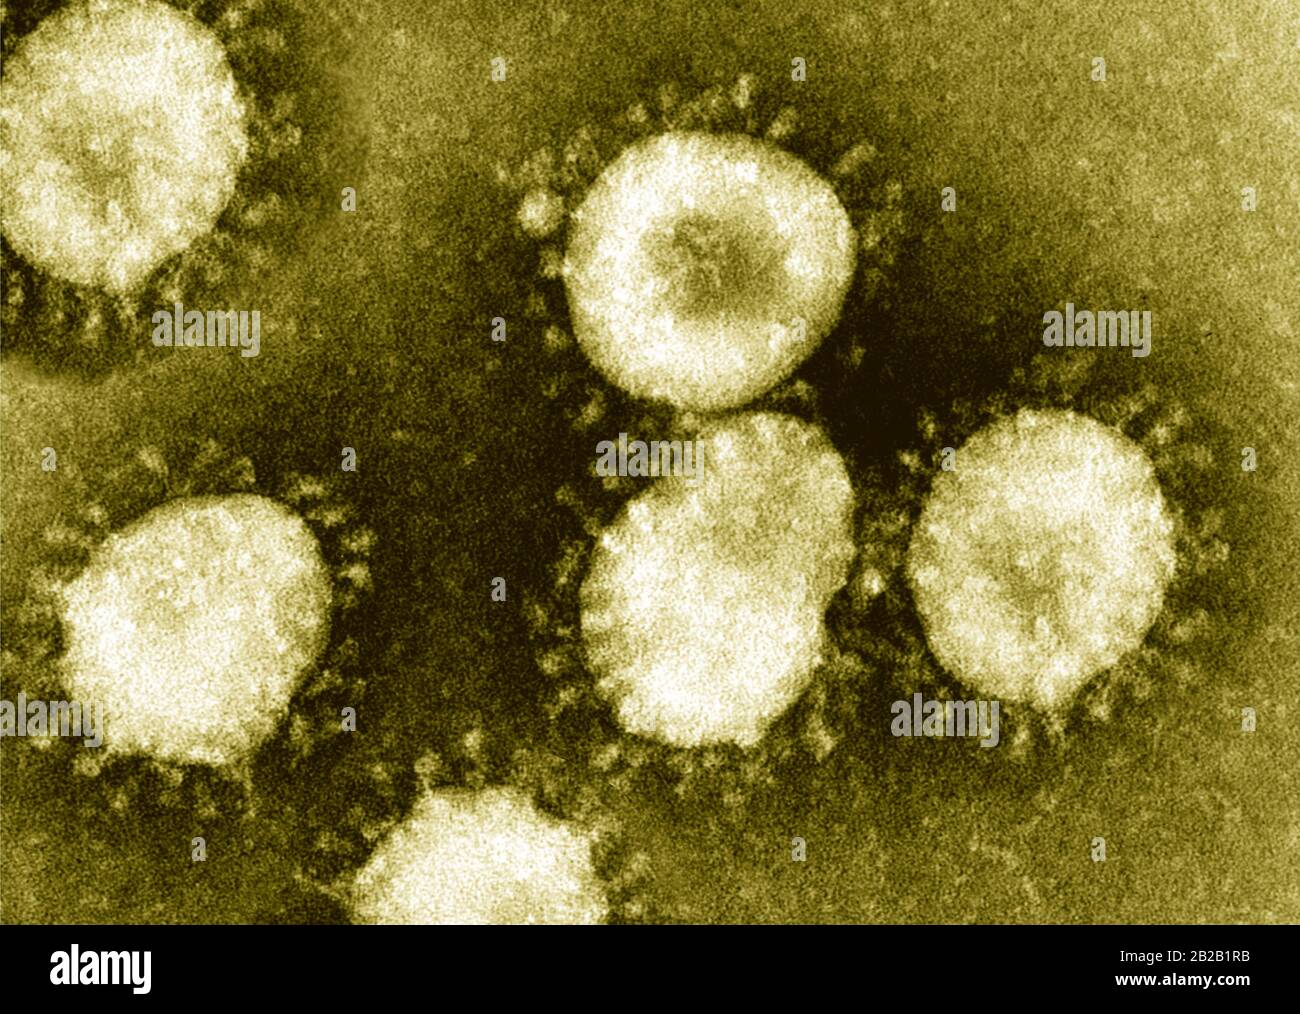 detail of ultraestructure of deadly coronavirus particles under transmission electron microscopy (TEM). Stock Photo